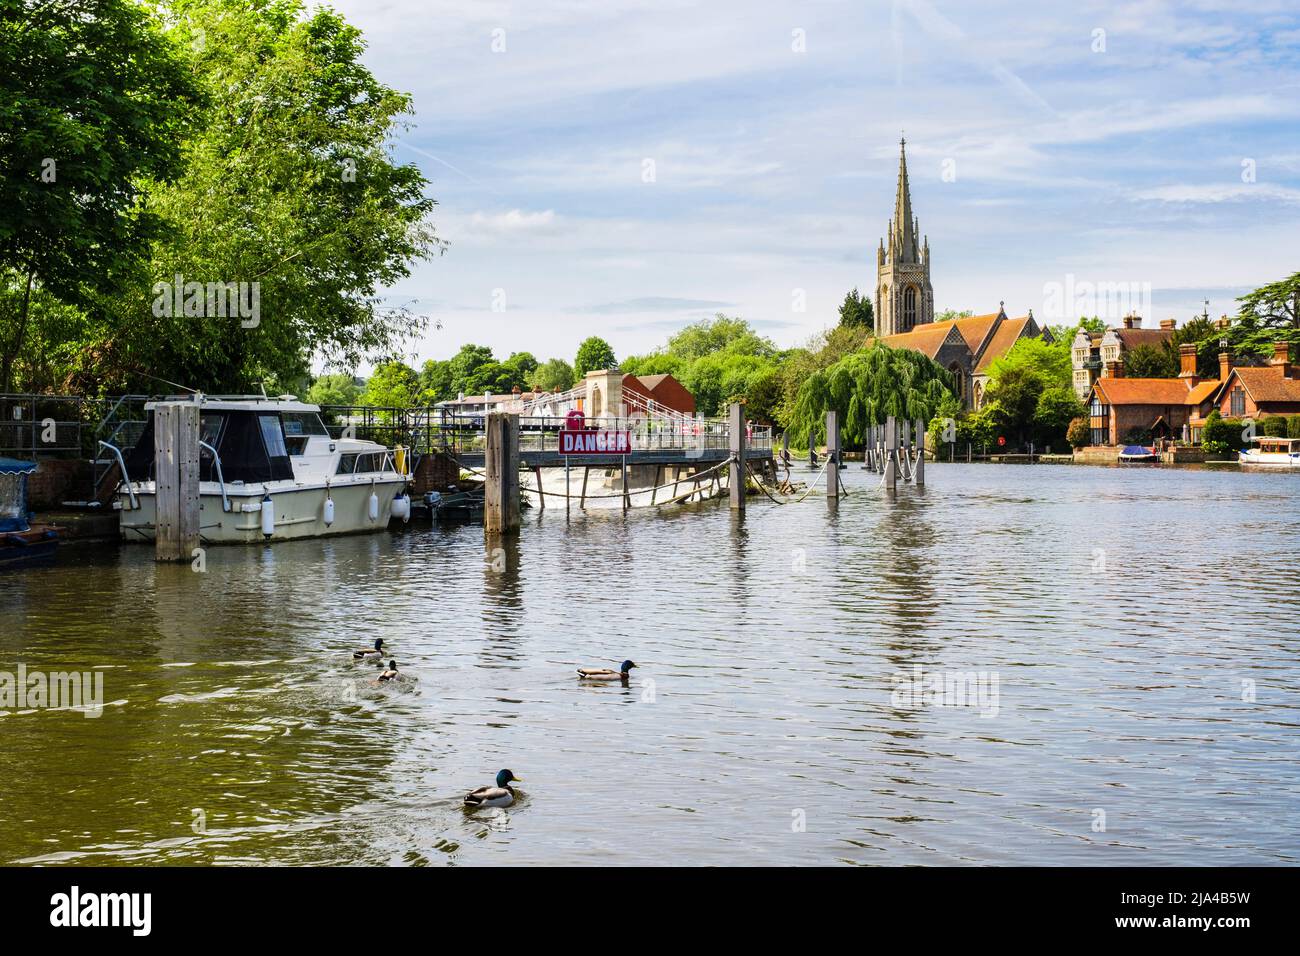 View from Marlow lock along River Thames to weir and All Saints Church in the town of Marlow, Buckinghamshire, England, UK, Britain Stock Photo